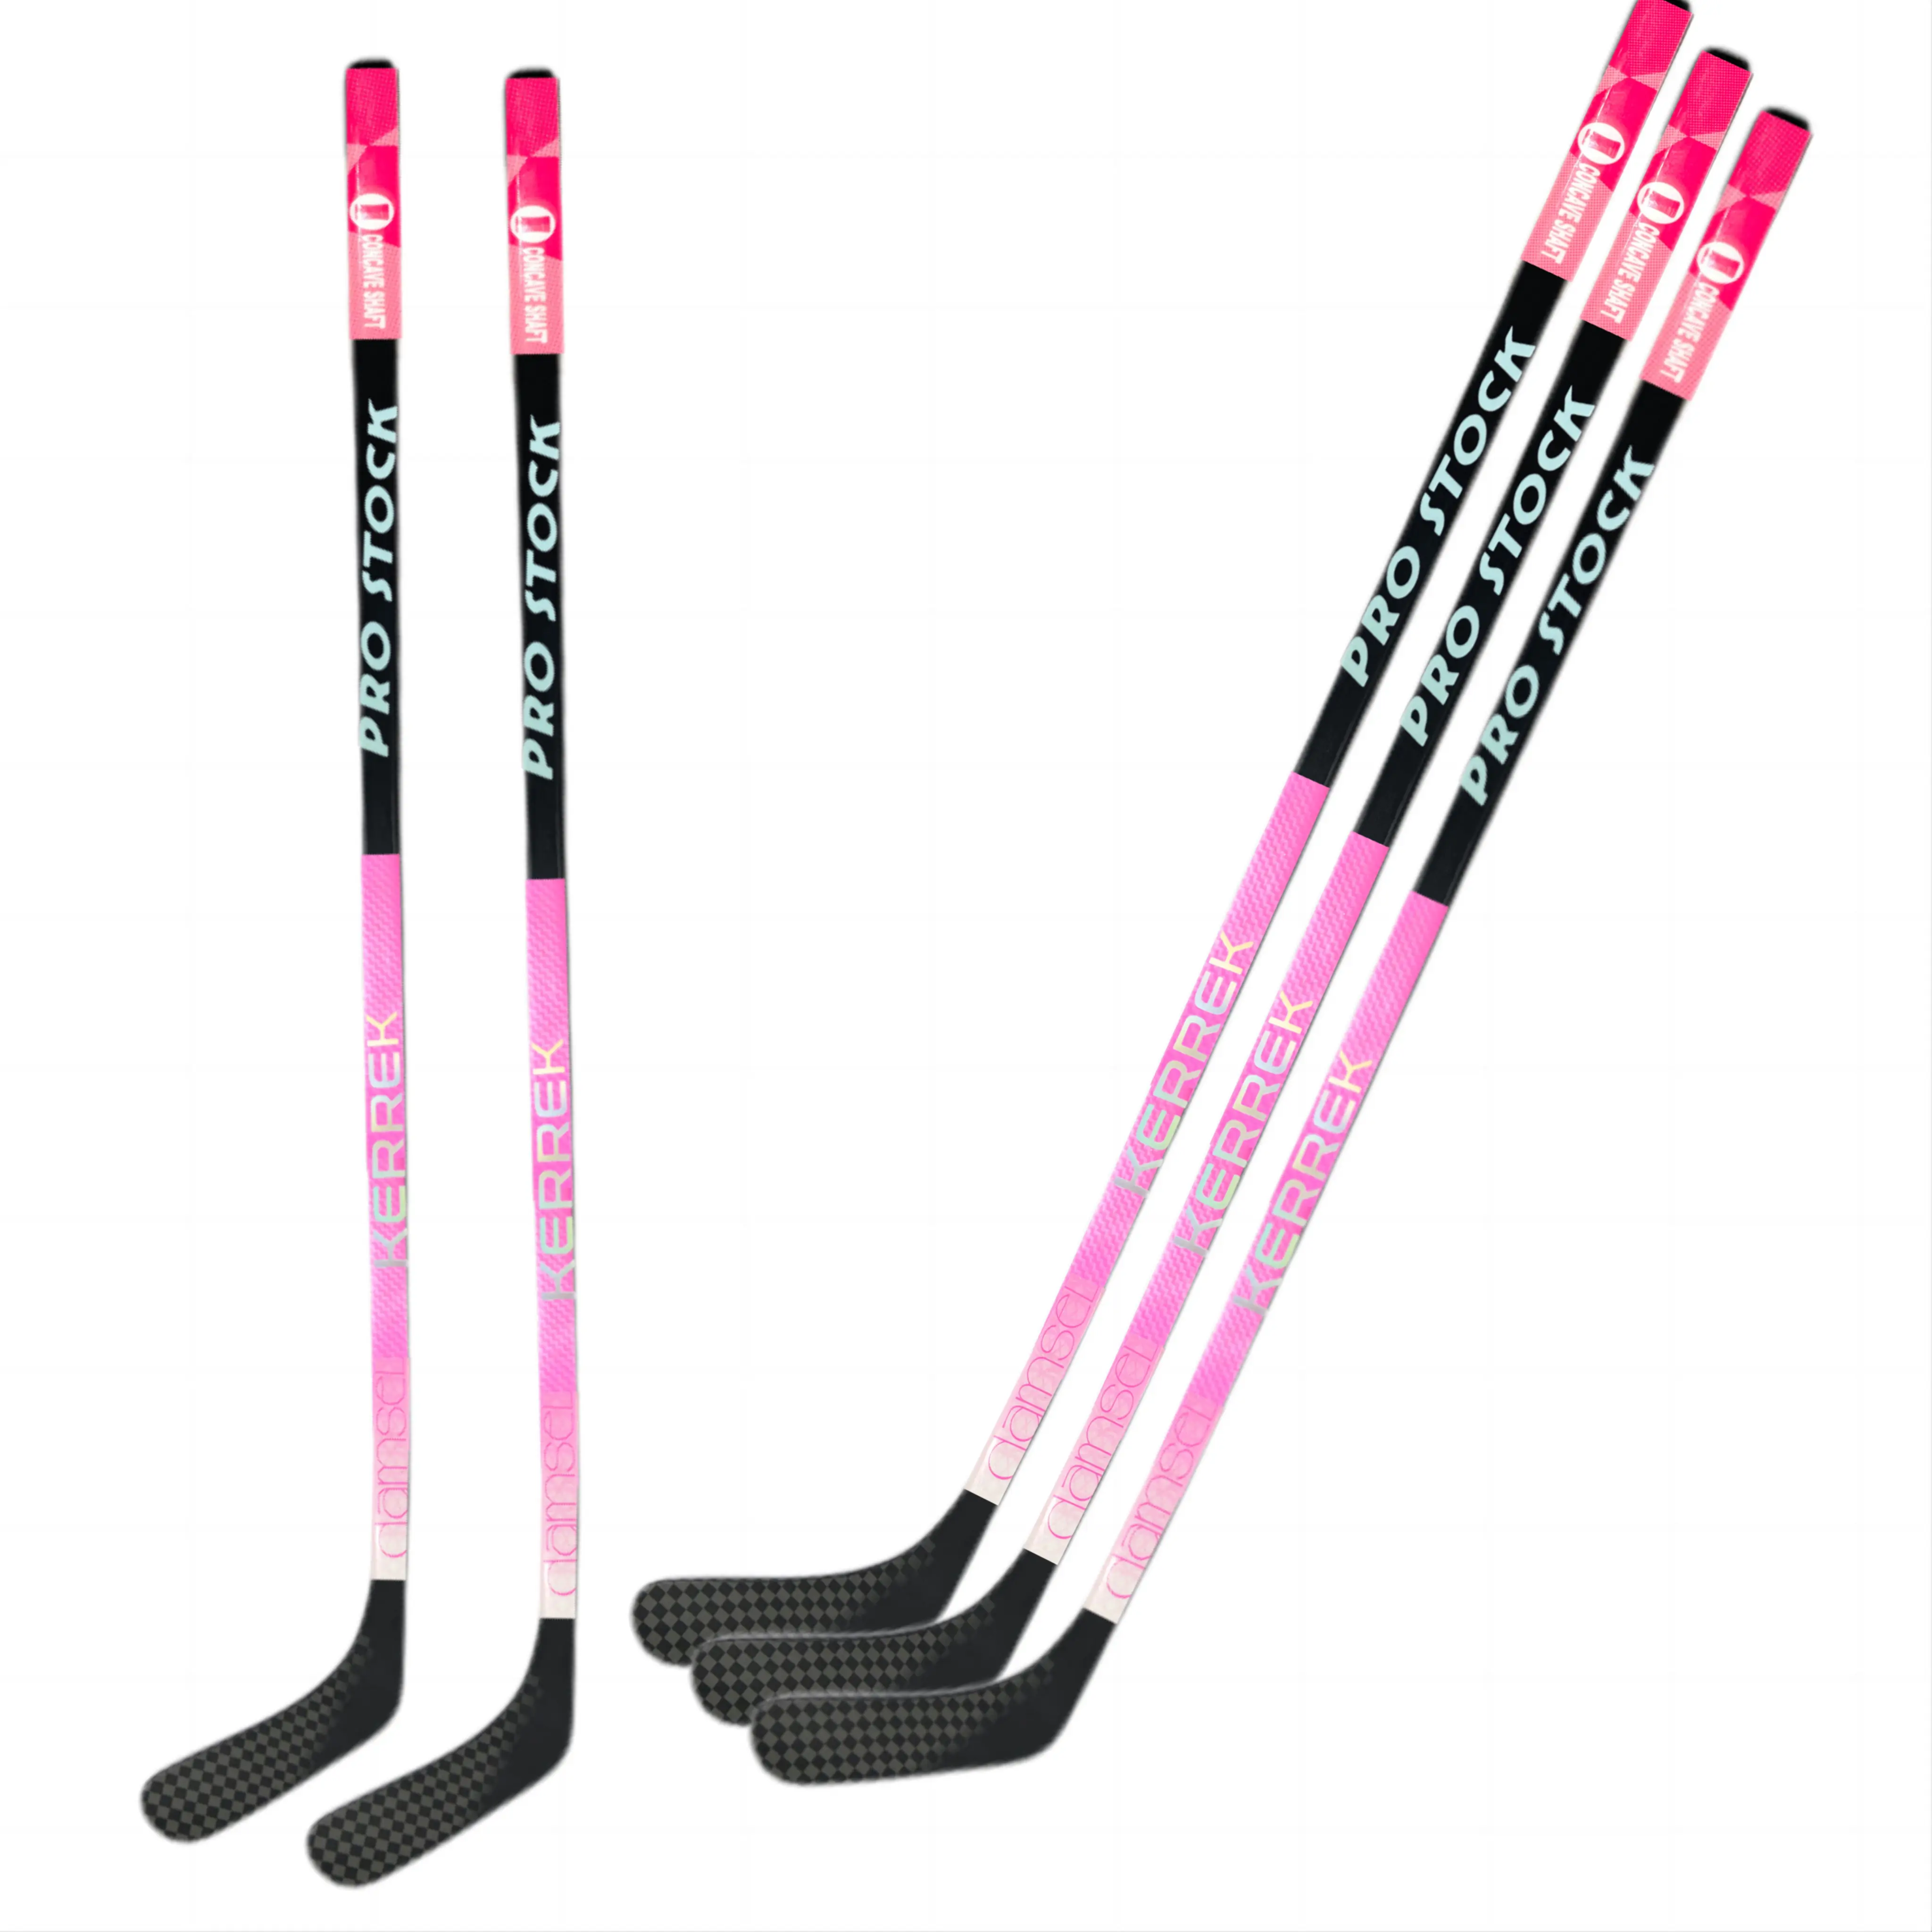 Customized New Arrival Ice Hockey Sticks Series New With Grip Ultra light 390g Blank Carbon Fiber Ice With Strength Store